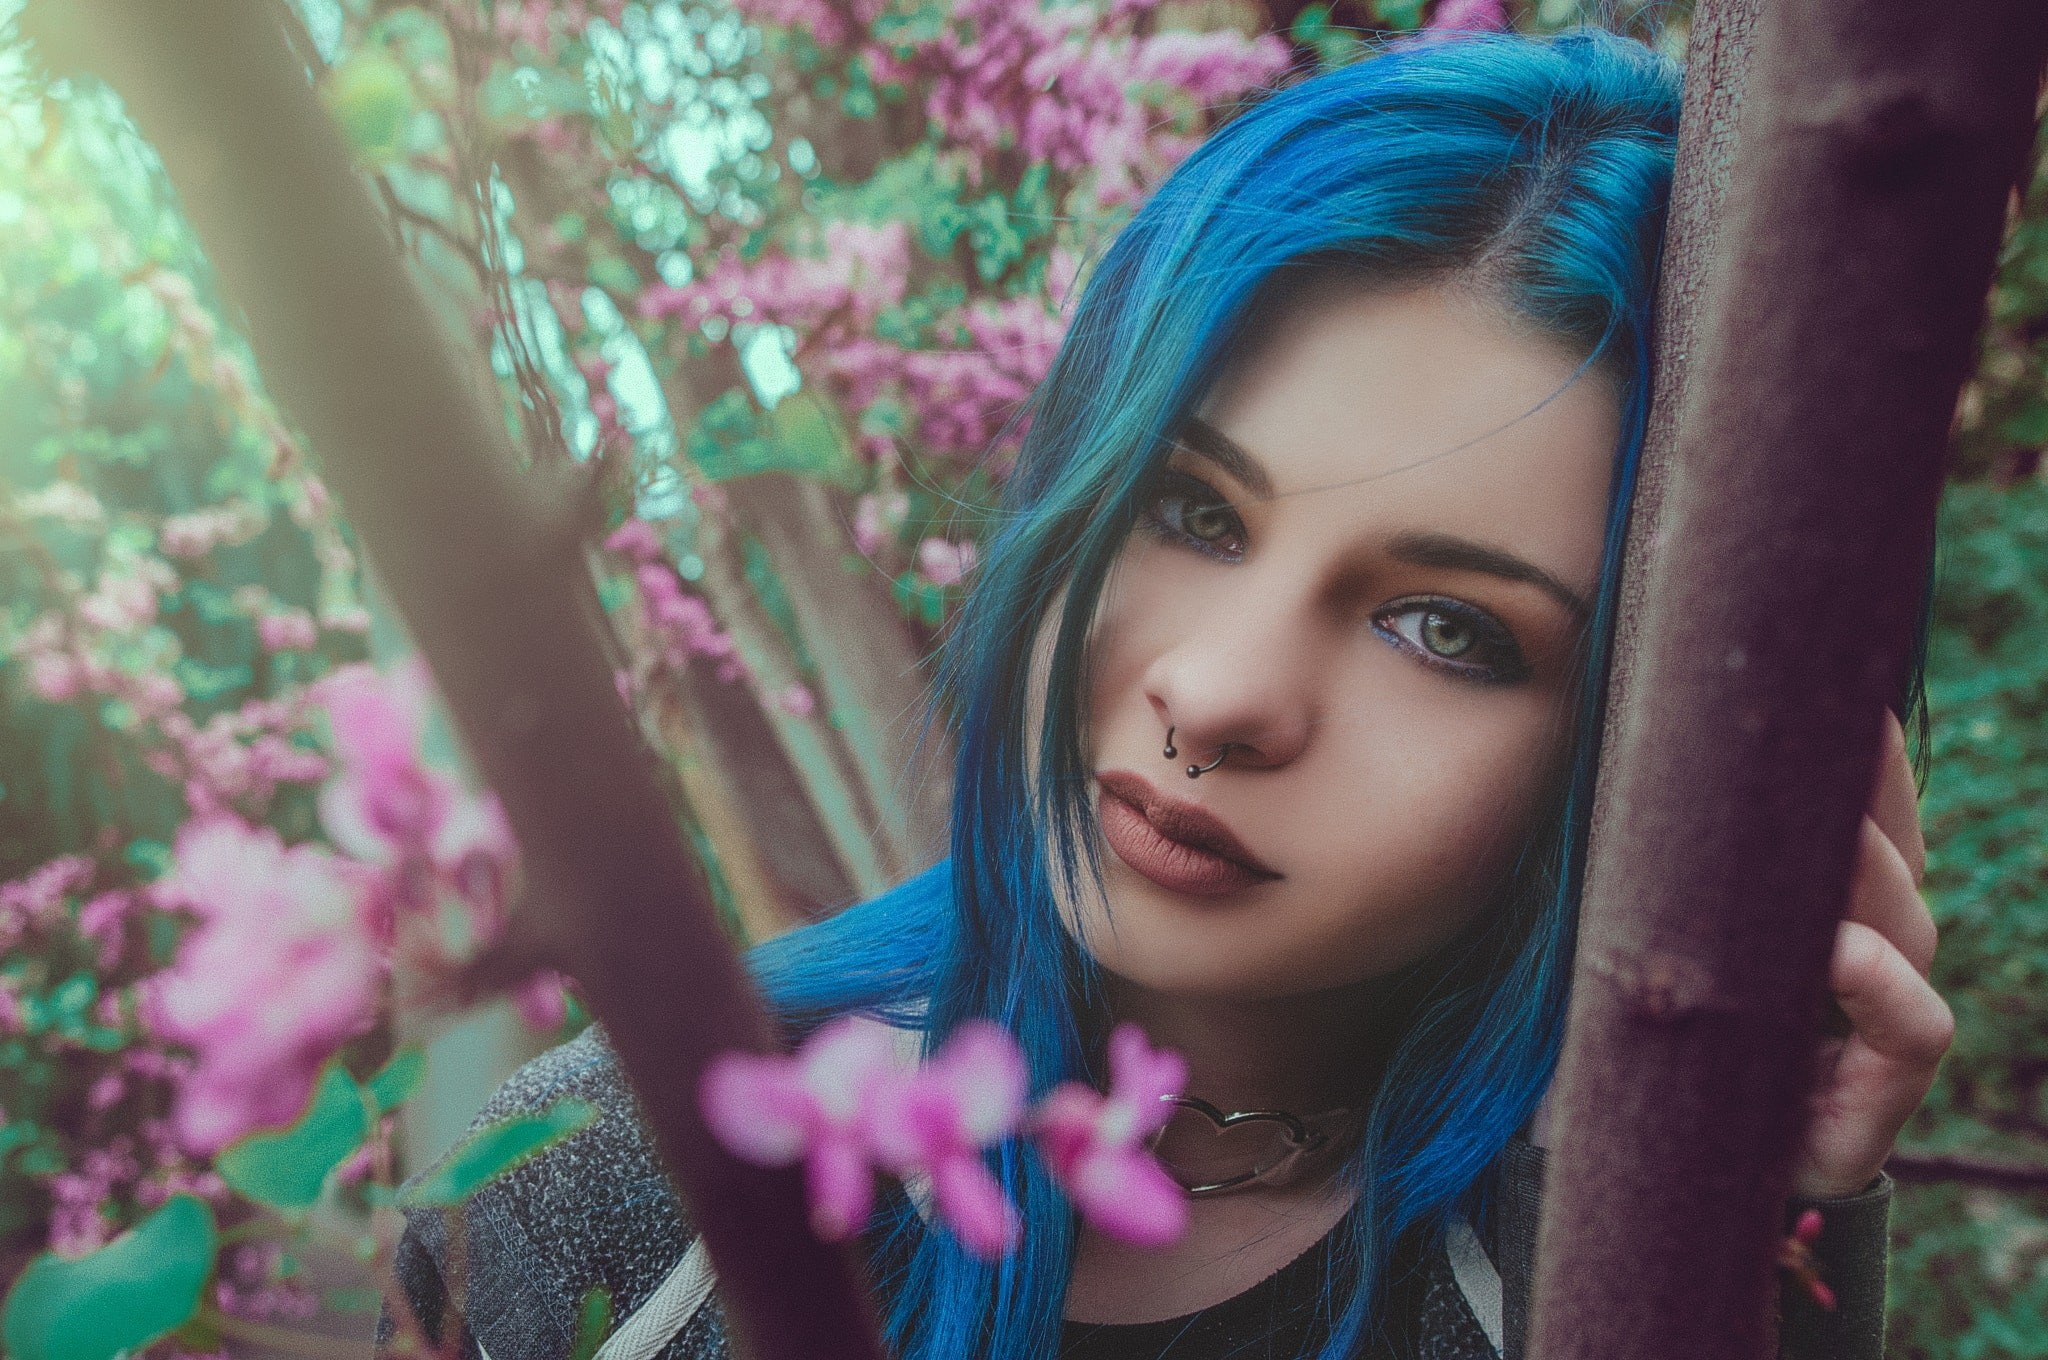 women, face, dyed hair, portrait, blue hair, nose rings, depth of field